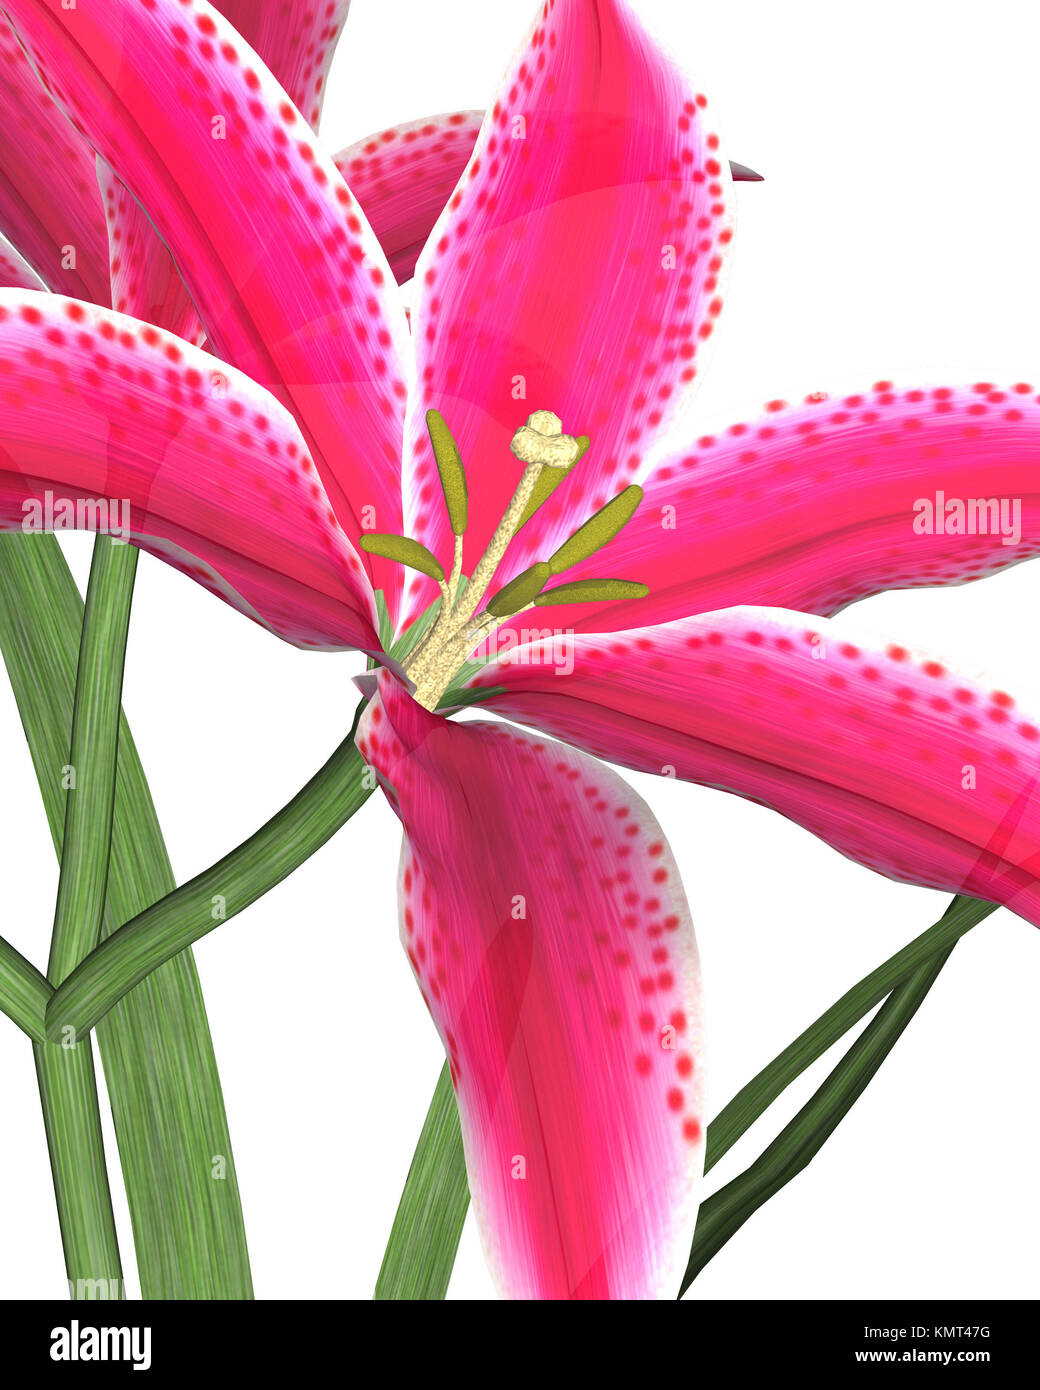 Large pink lily on a white background Stock Photo